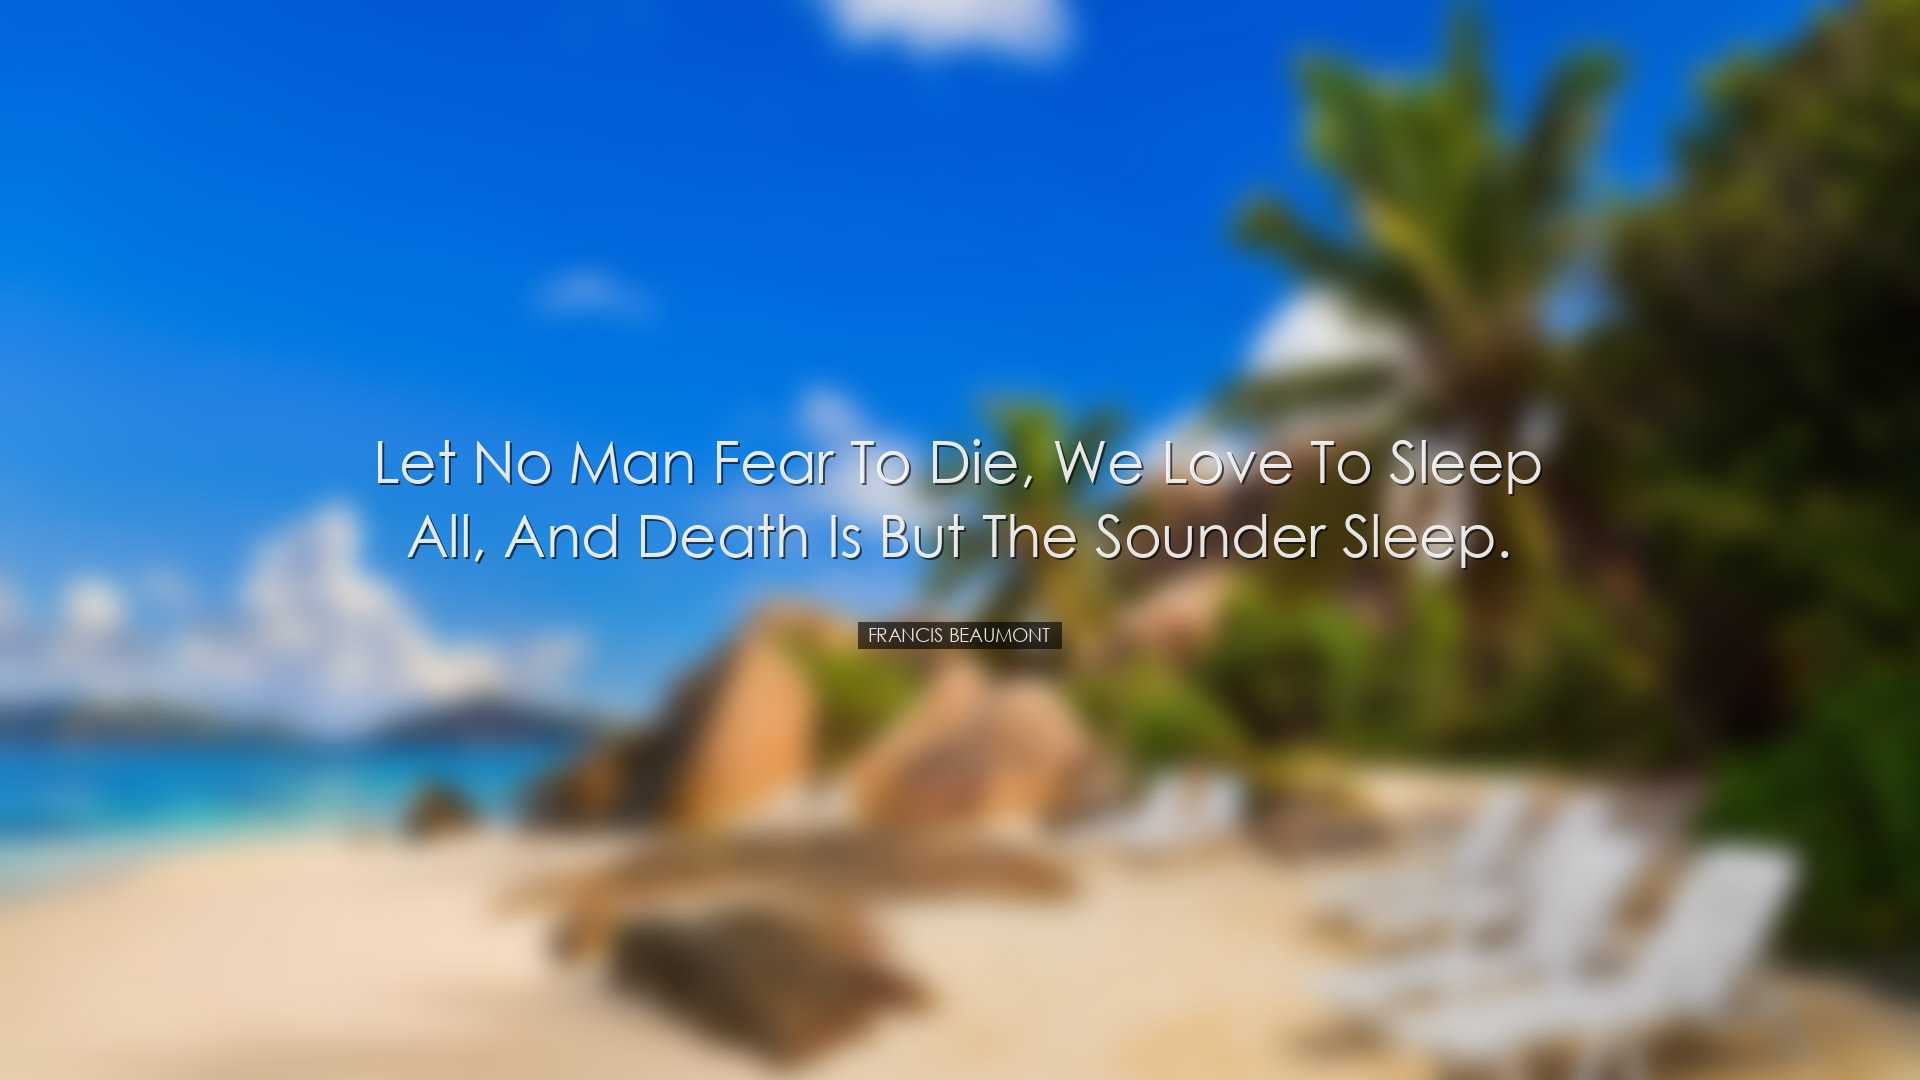 Let no man fear to die, we love to sleep all, and death is but the